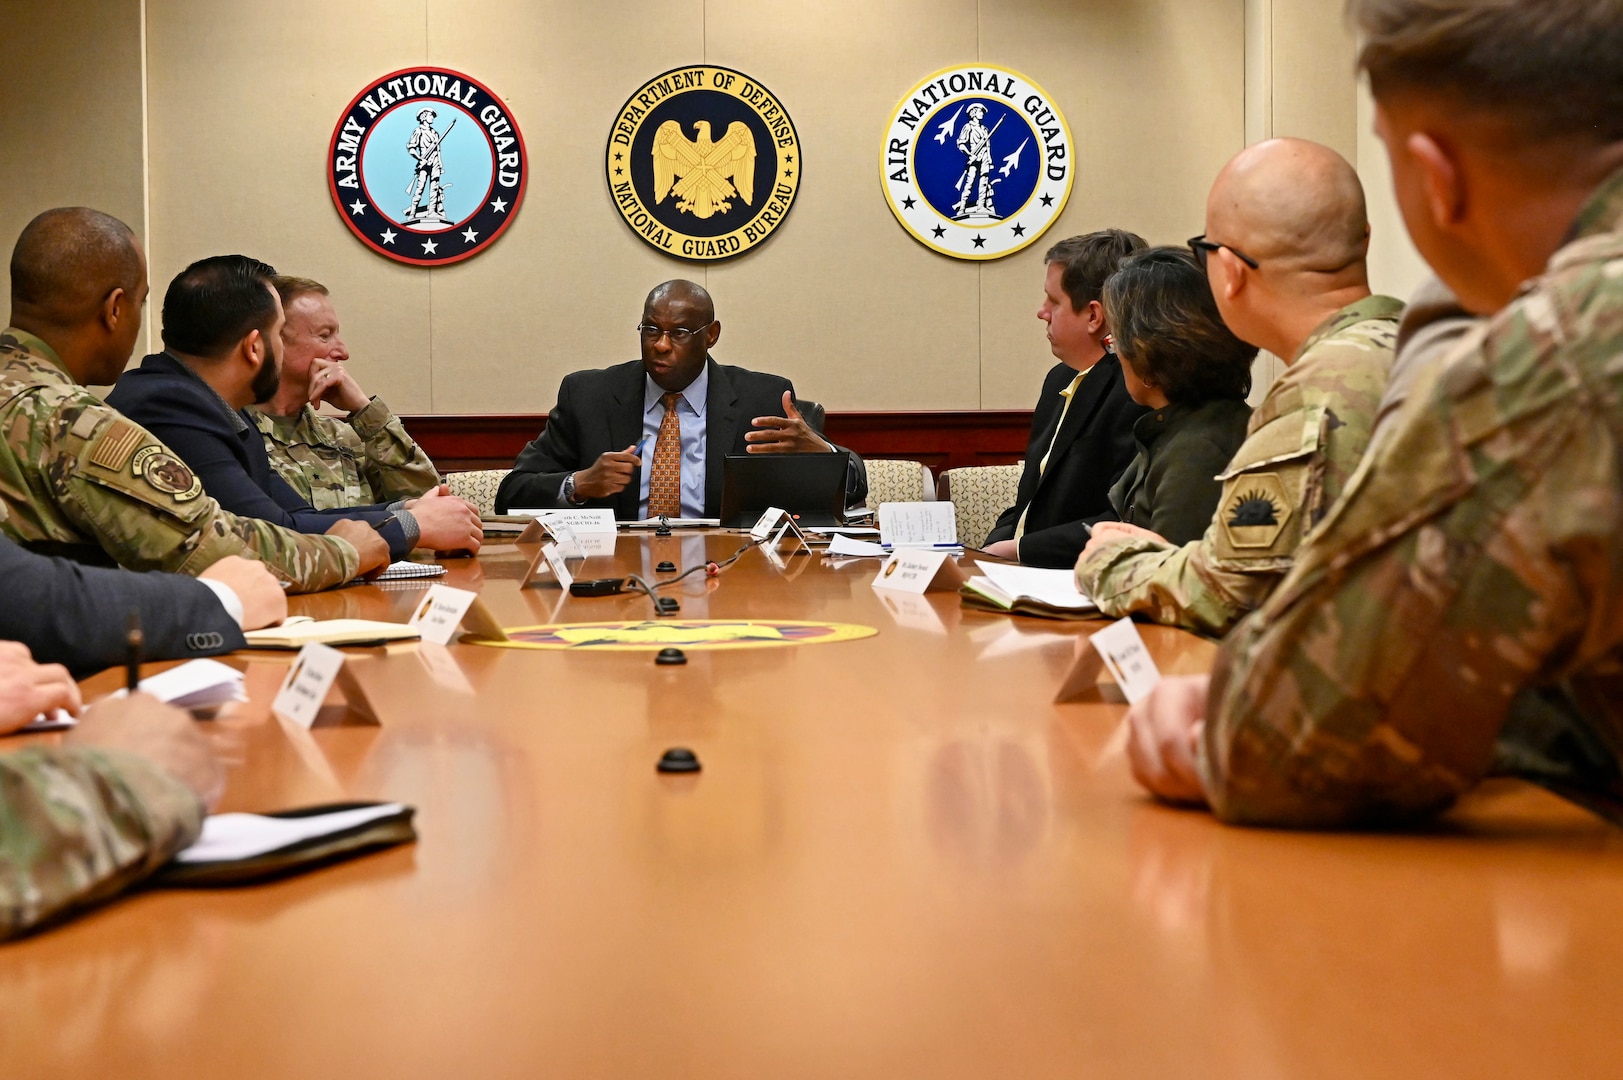 Kenneth C. McNeill, a senior executive service member and the chief information officer of the National Guard Bureau, speaks to Project Theia officials and other interested parties during a discussion at the Pentagon Feb., 2, 2023. Named after the Greek goddess of sight, Theia centralizes video data, then applies Artificial Intelligence solutions to increase situational awareness among those responding to natural or man-made disasters.